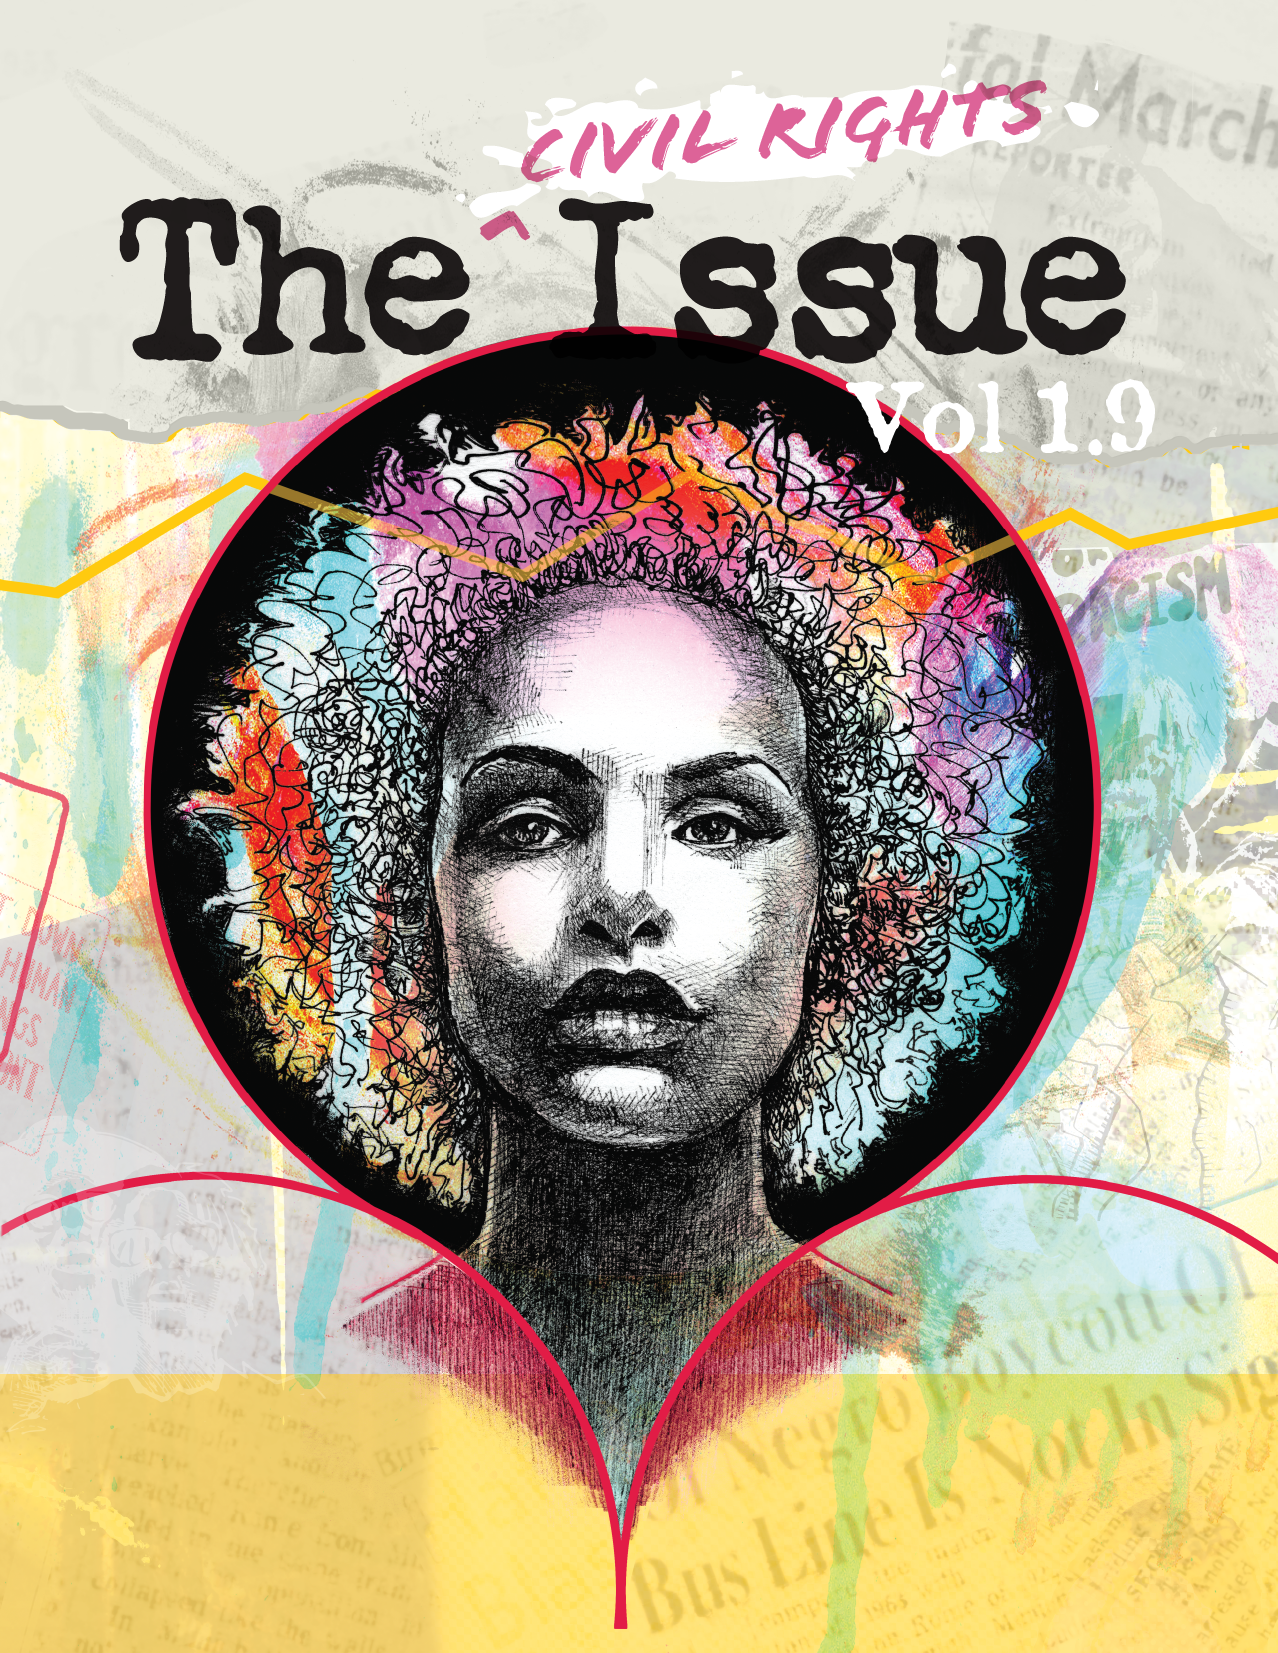 The Civil Rights Issue 1.8